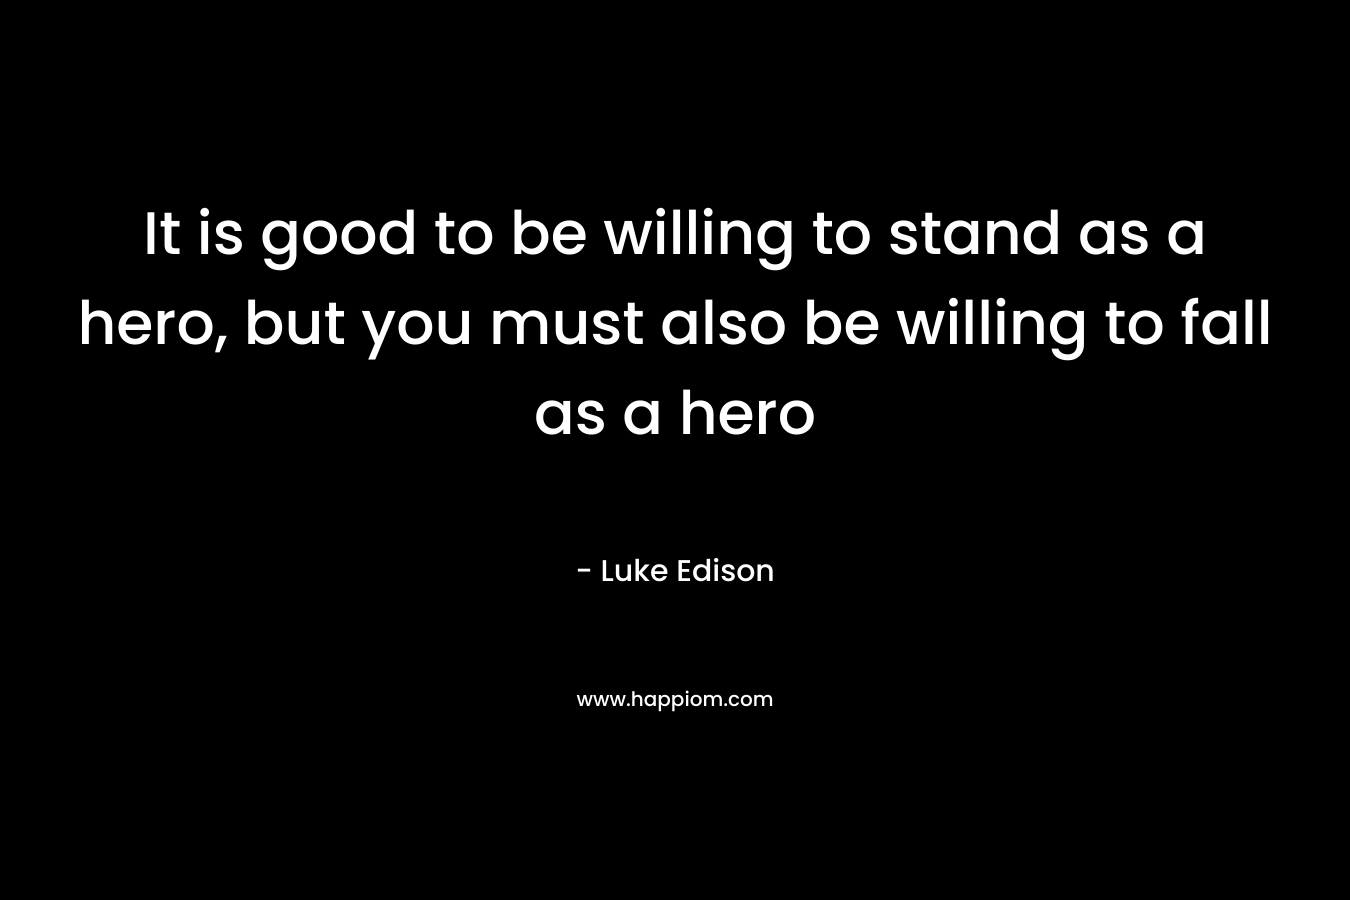 It is good to be willing to stand as a hero, but you must also be willing to fall as a hero – Luke Edison